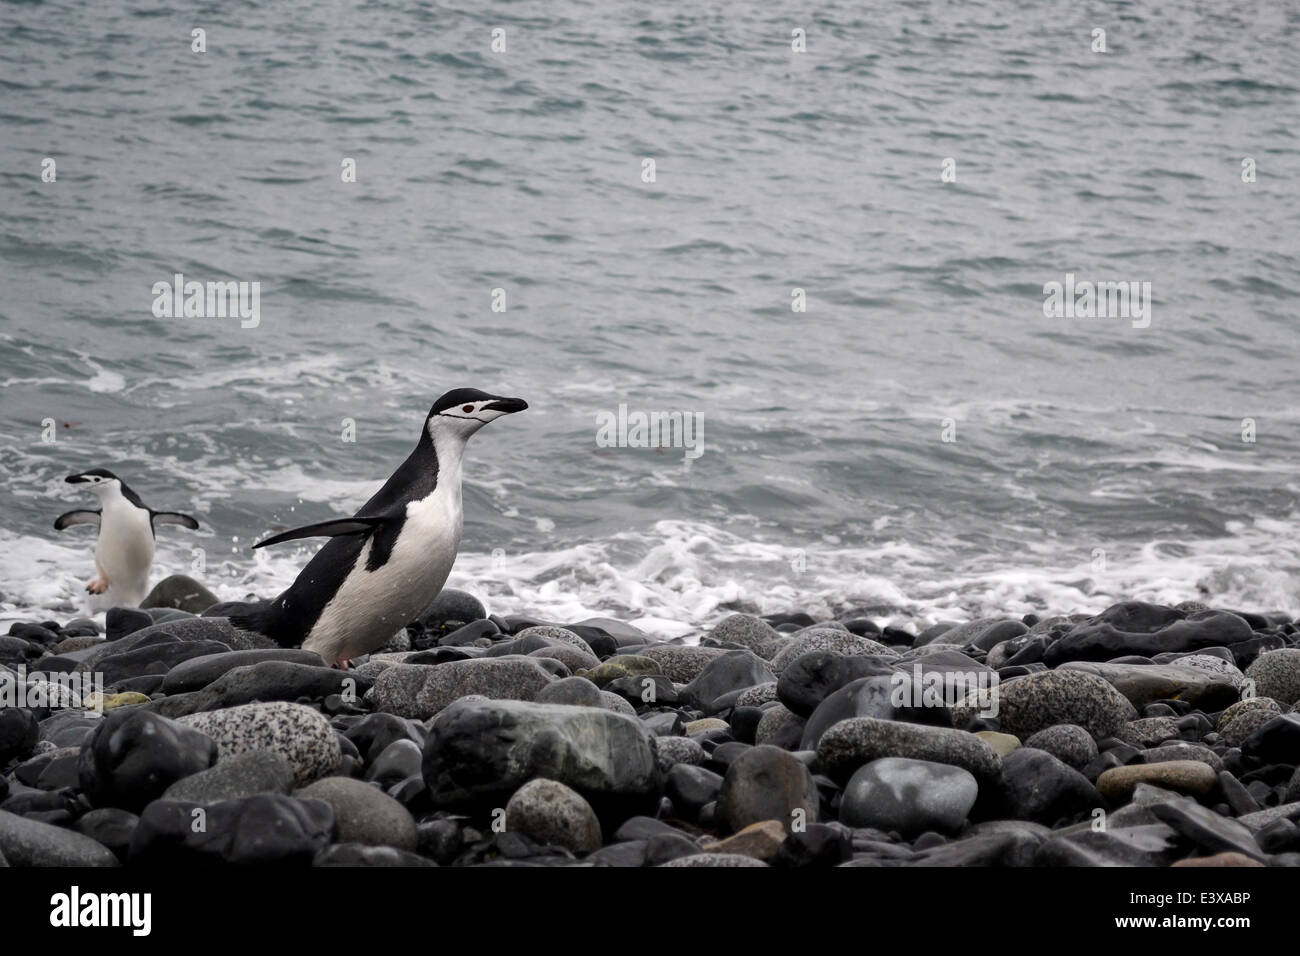 Chinstrap penguin leaving the water and running along the pebbled beach in Antarctica. Stock Photo